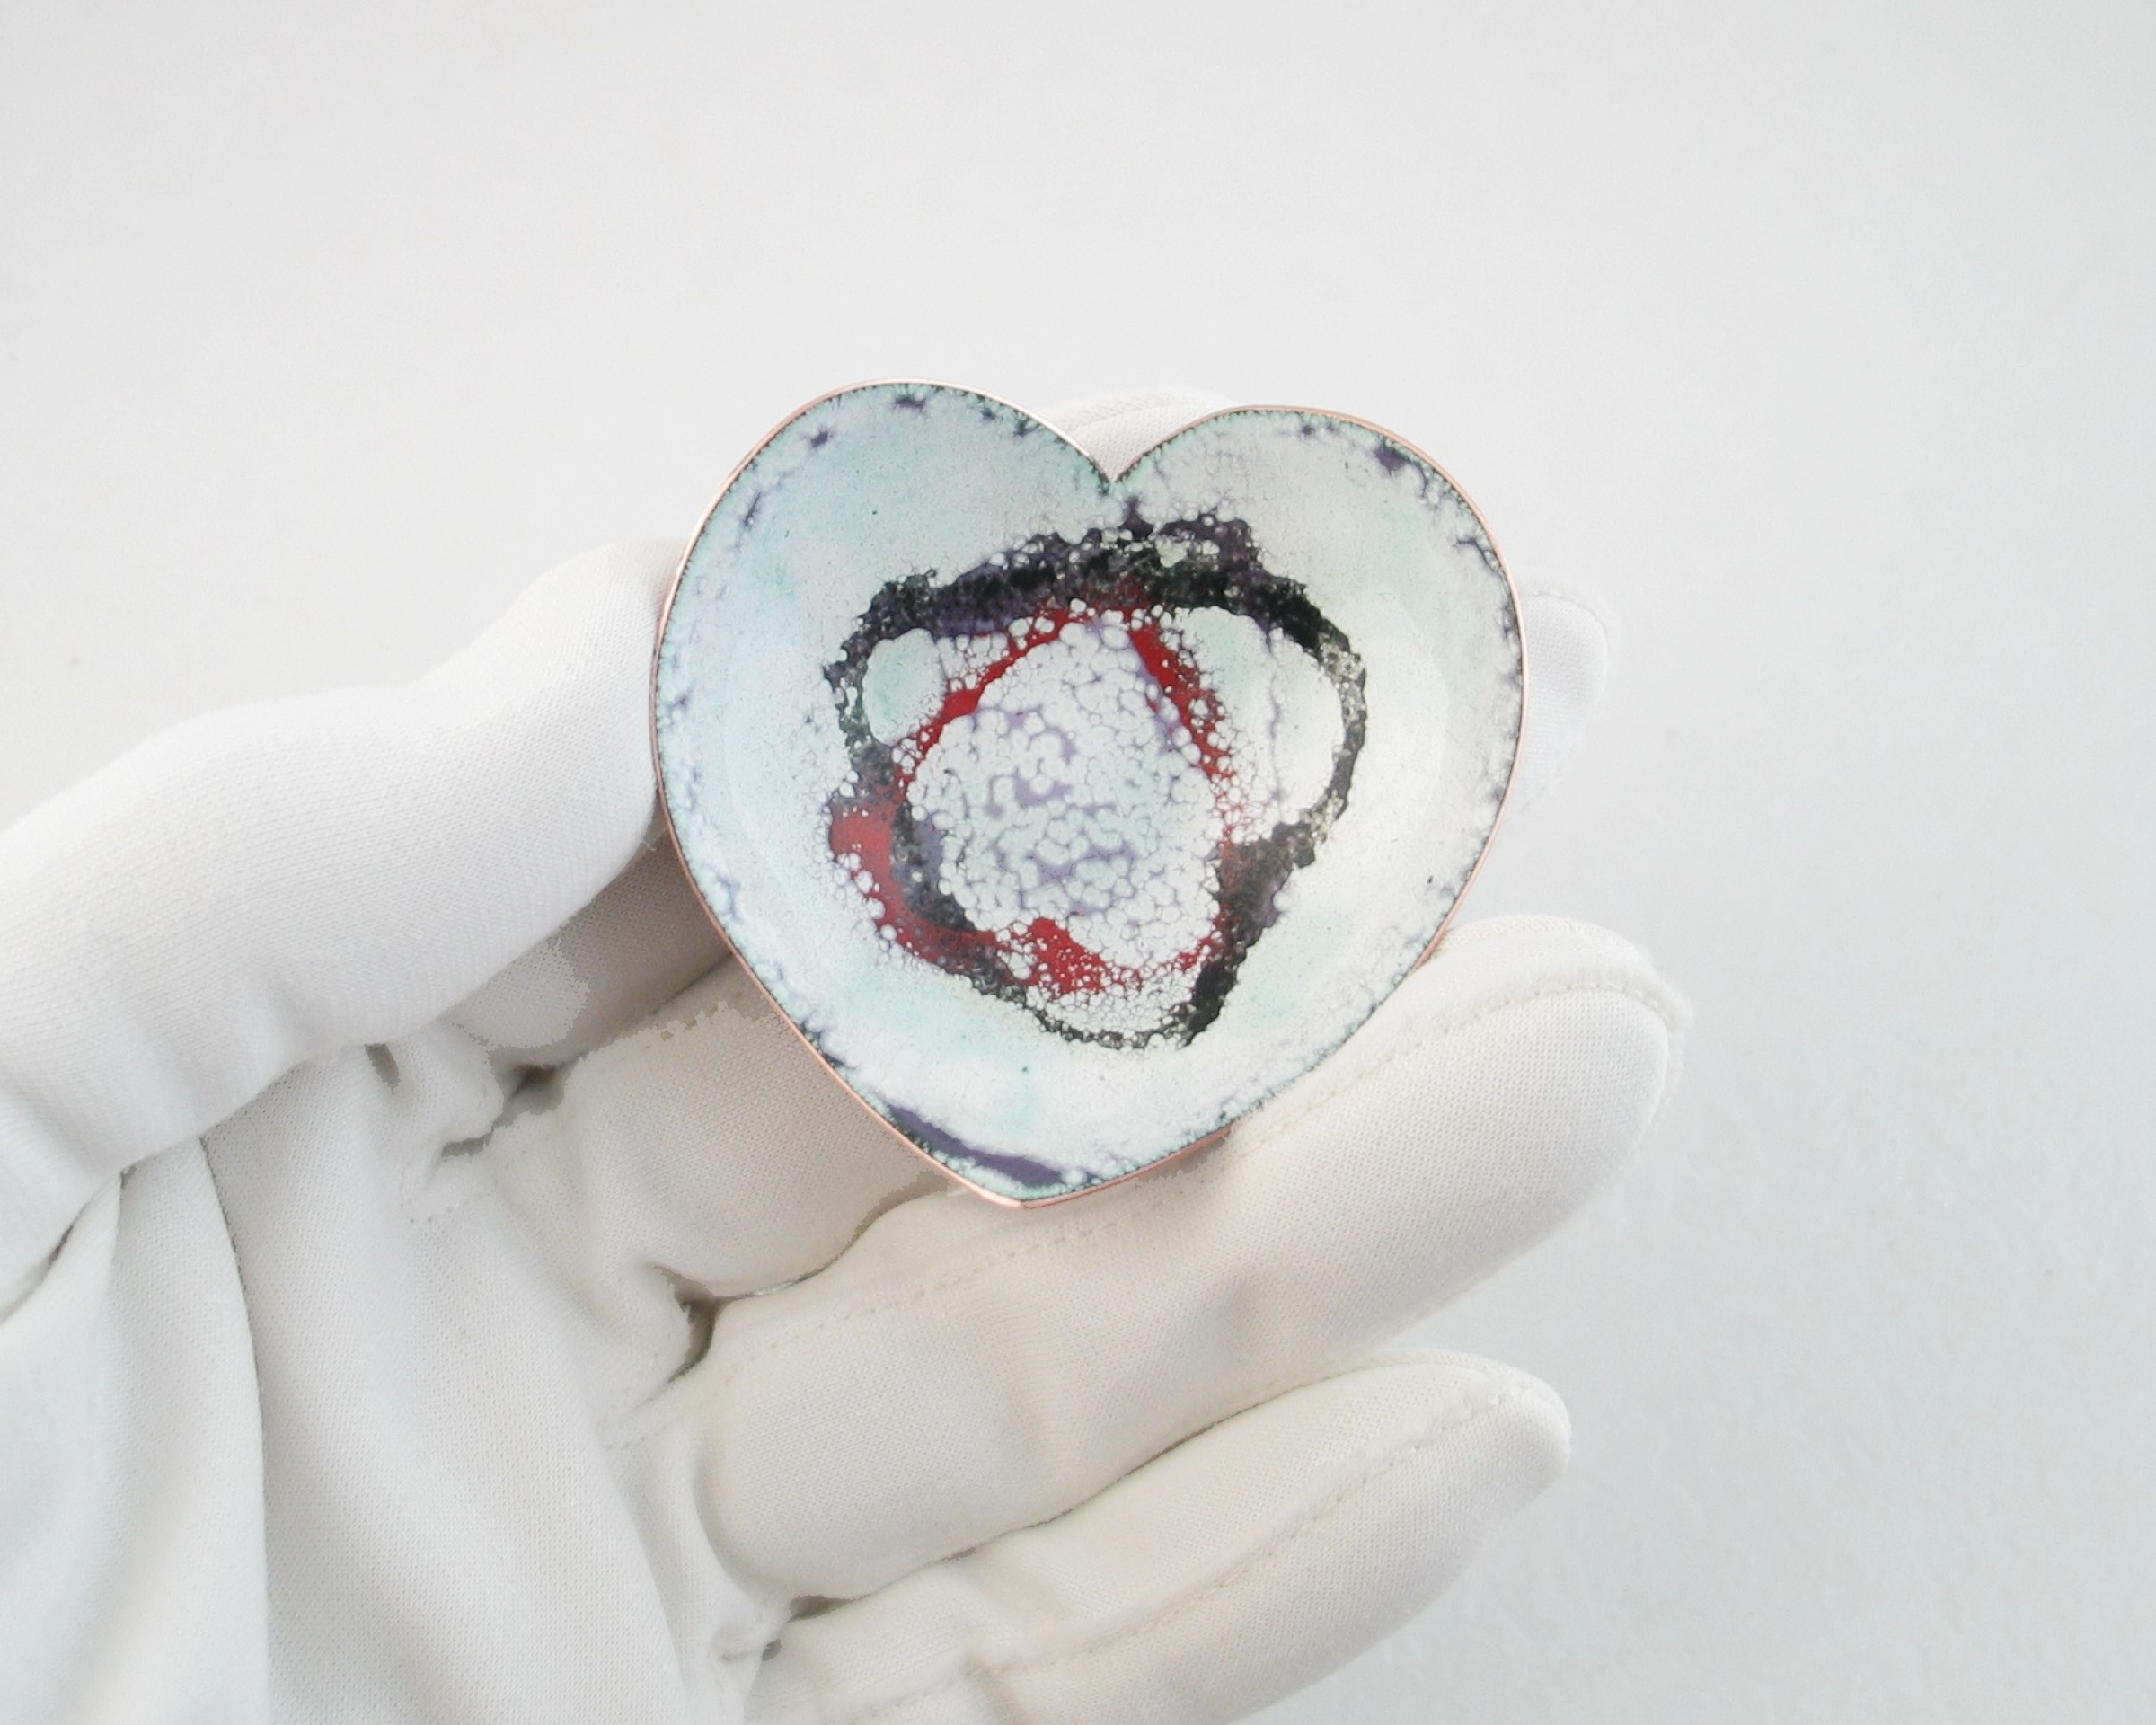 heart shaped copper enameled trinket ring dish with black and red hearts stenciled on shite, verdigris, purple